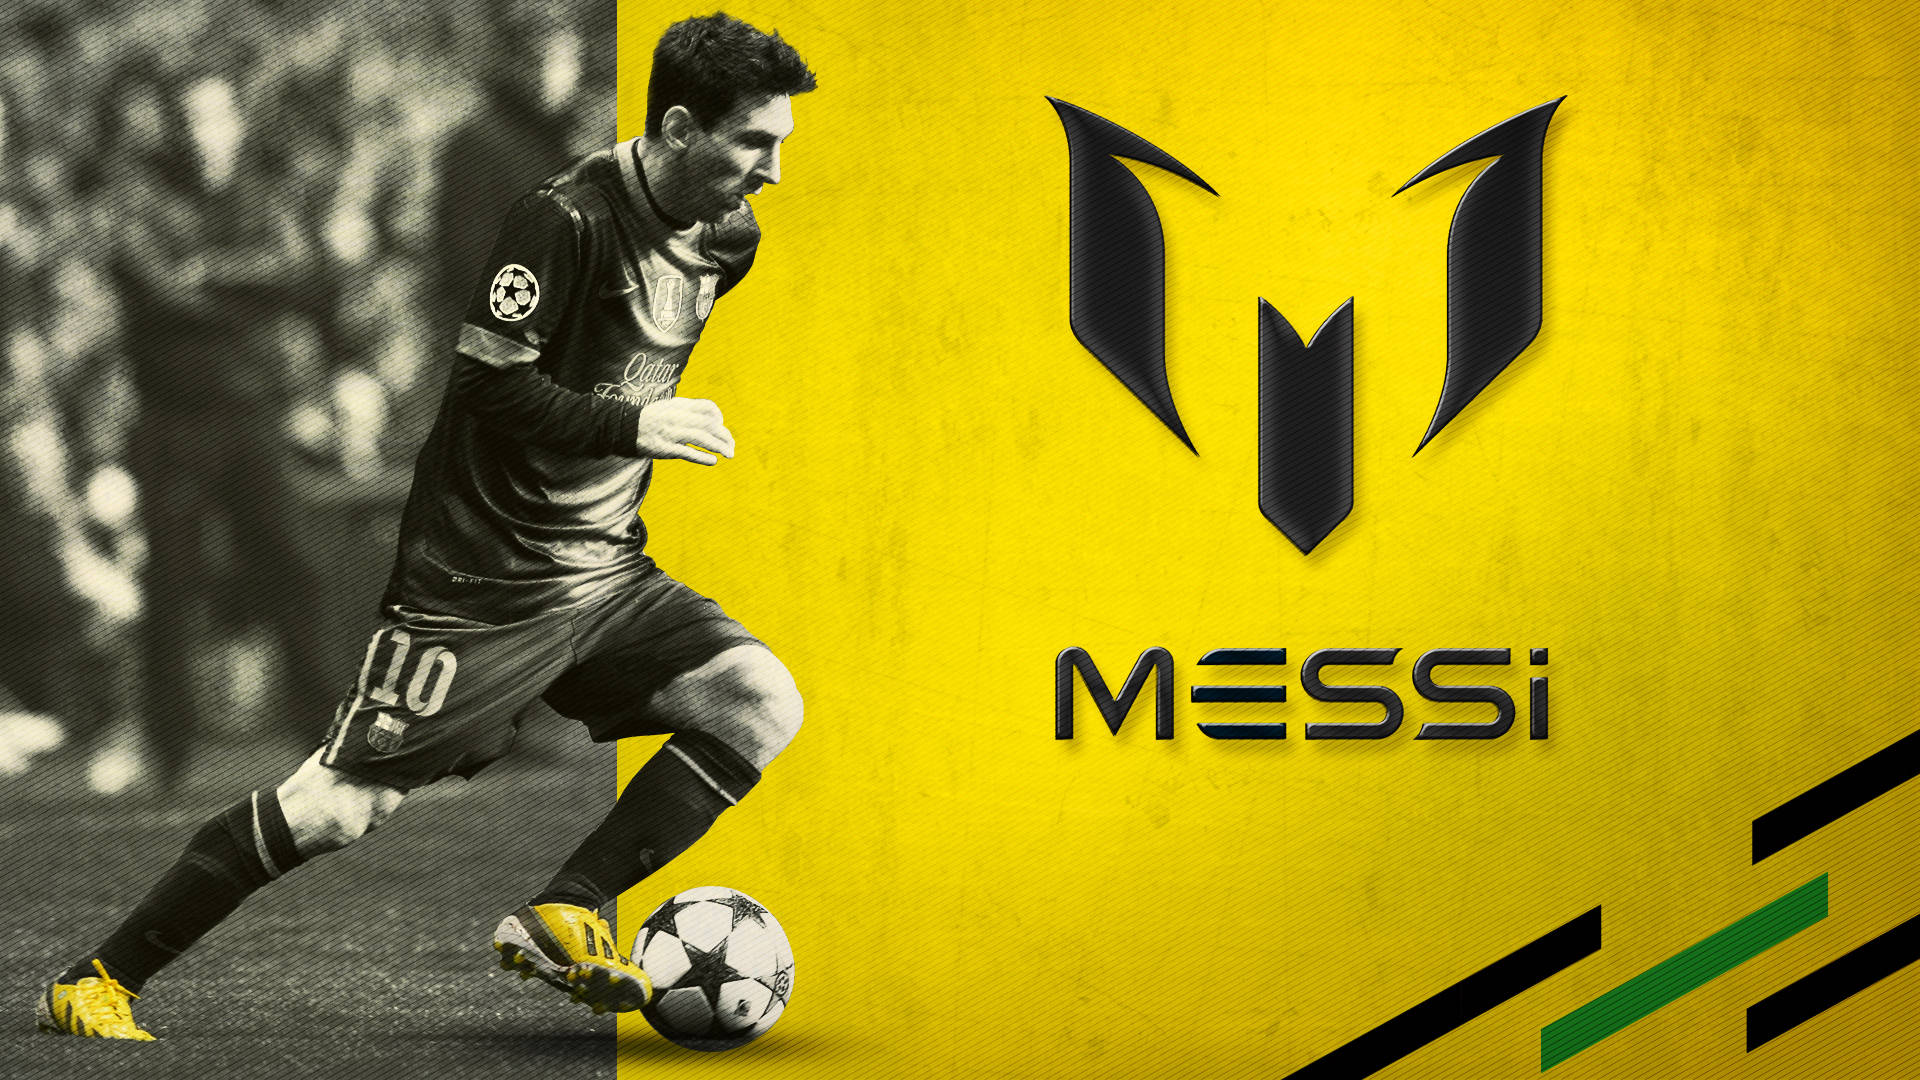 Cool Lionel Messi Poster Wallpaper